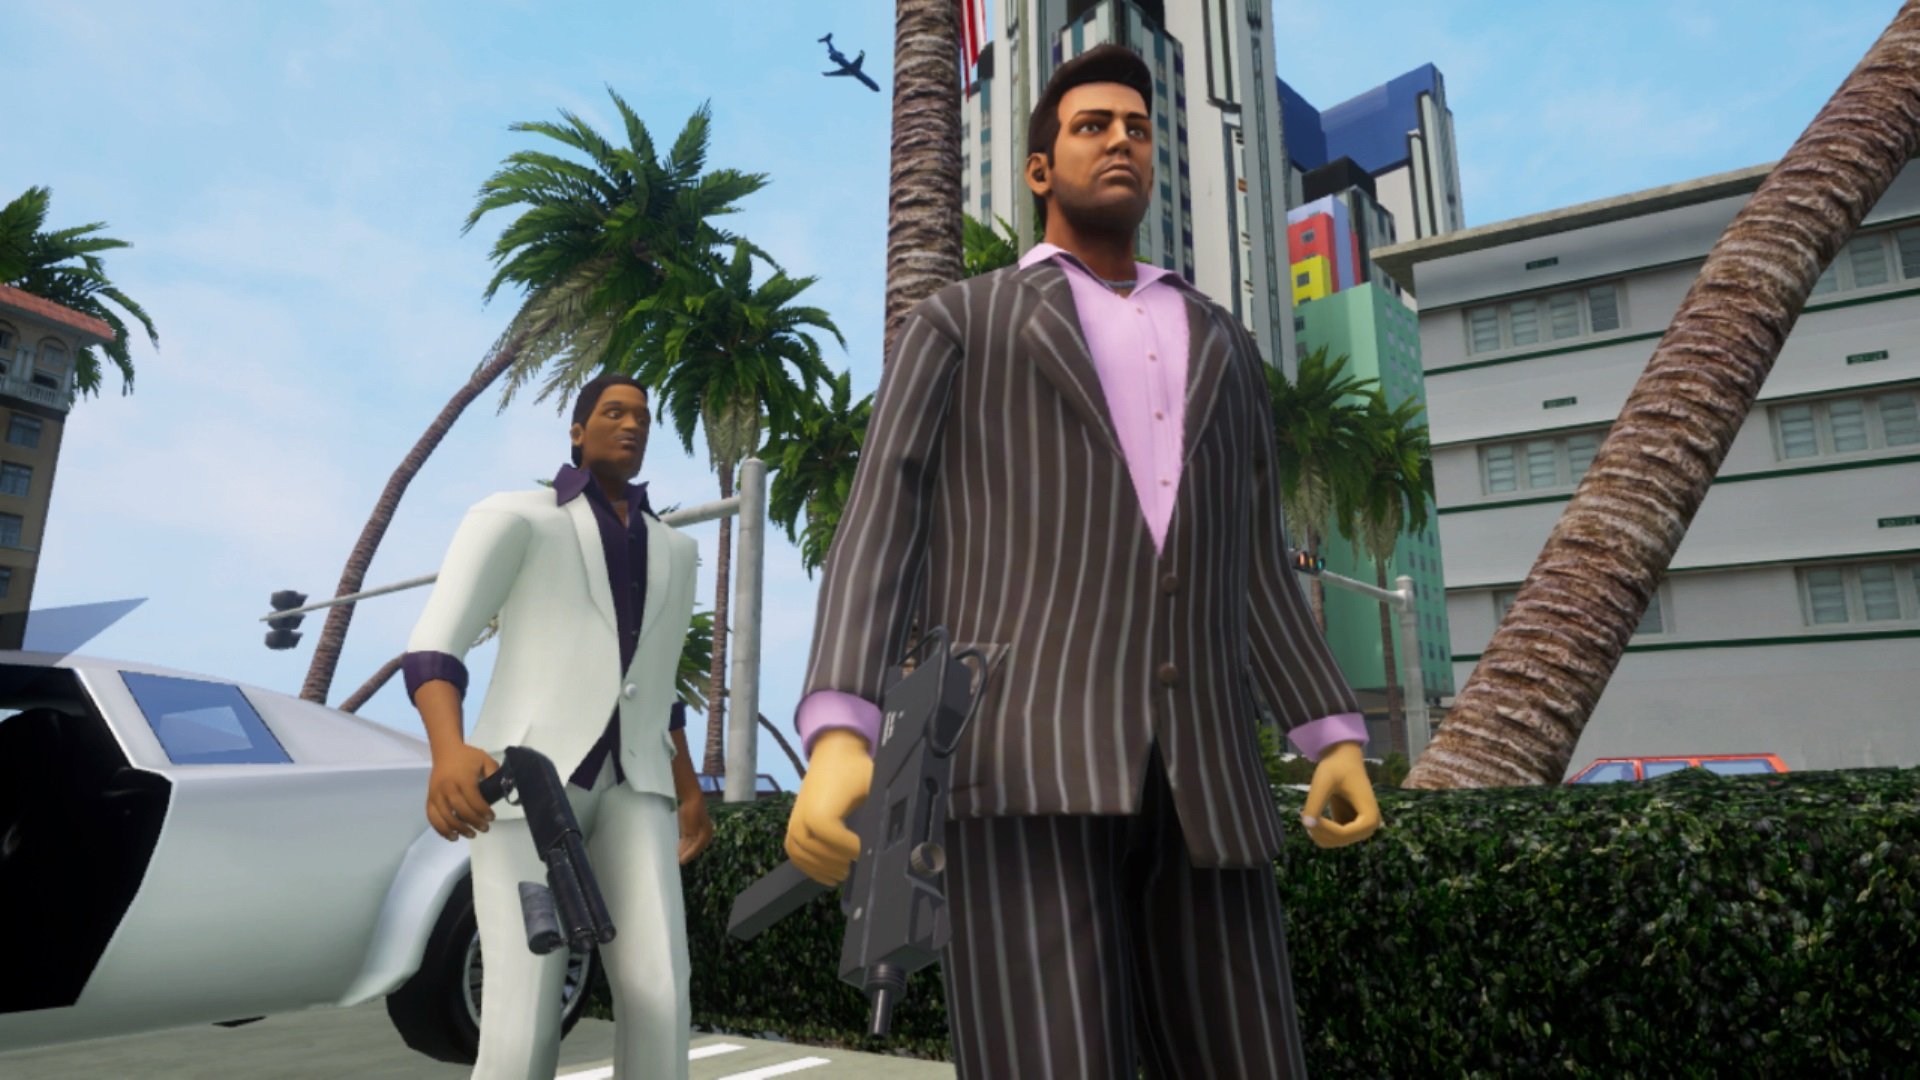 February's PlayStation Now games include GTA Vice City Definitive Edition